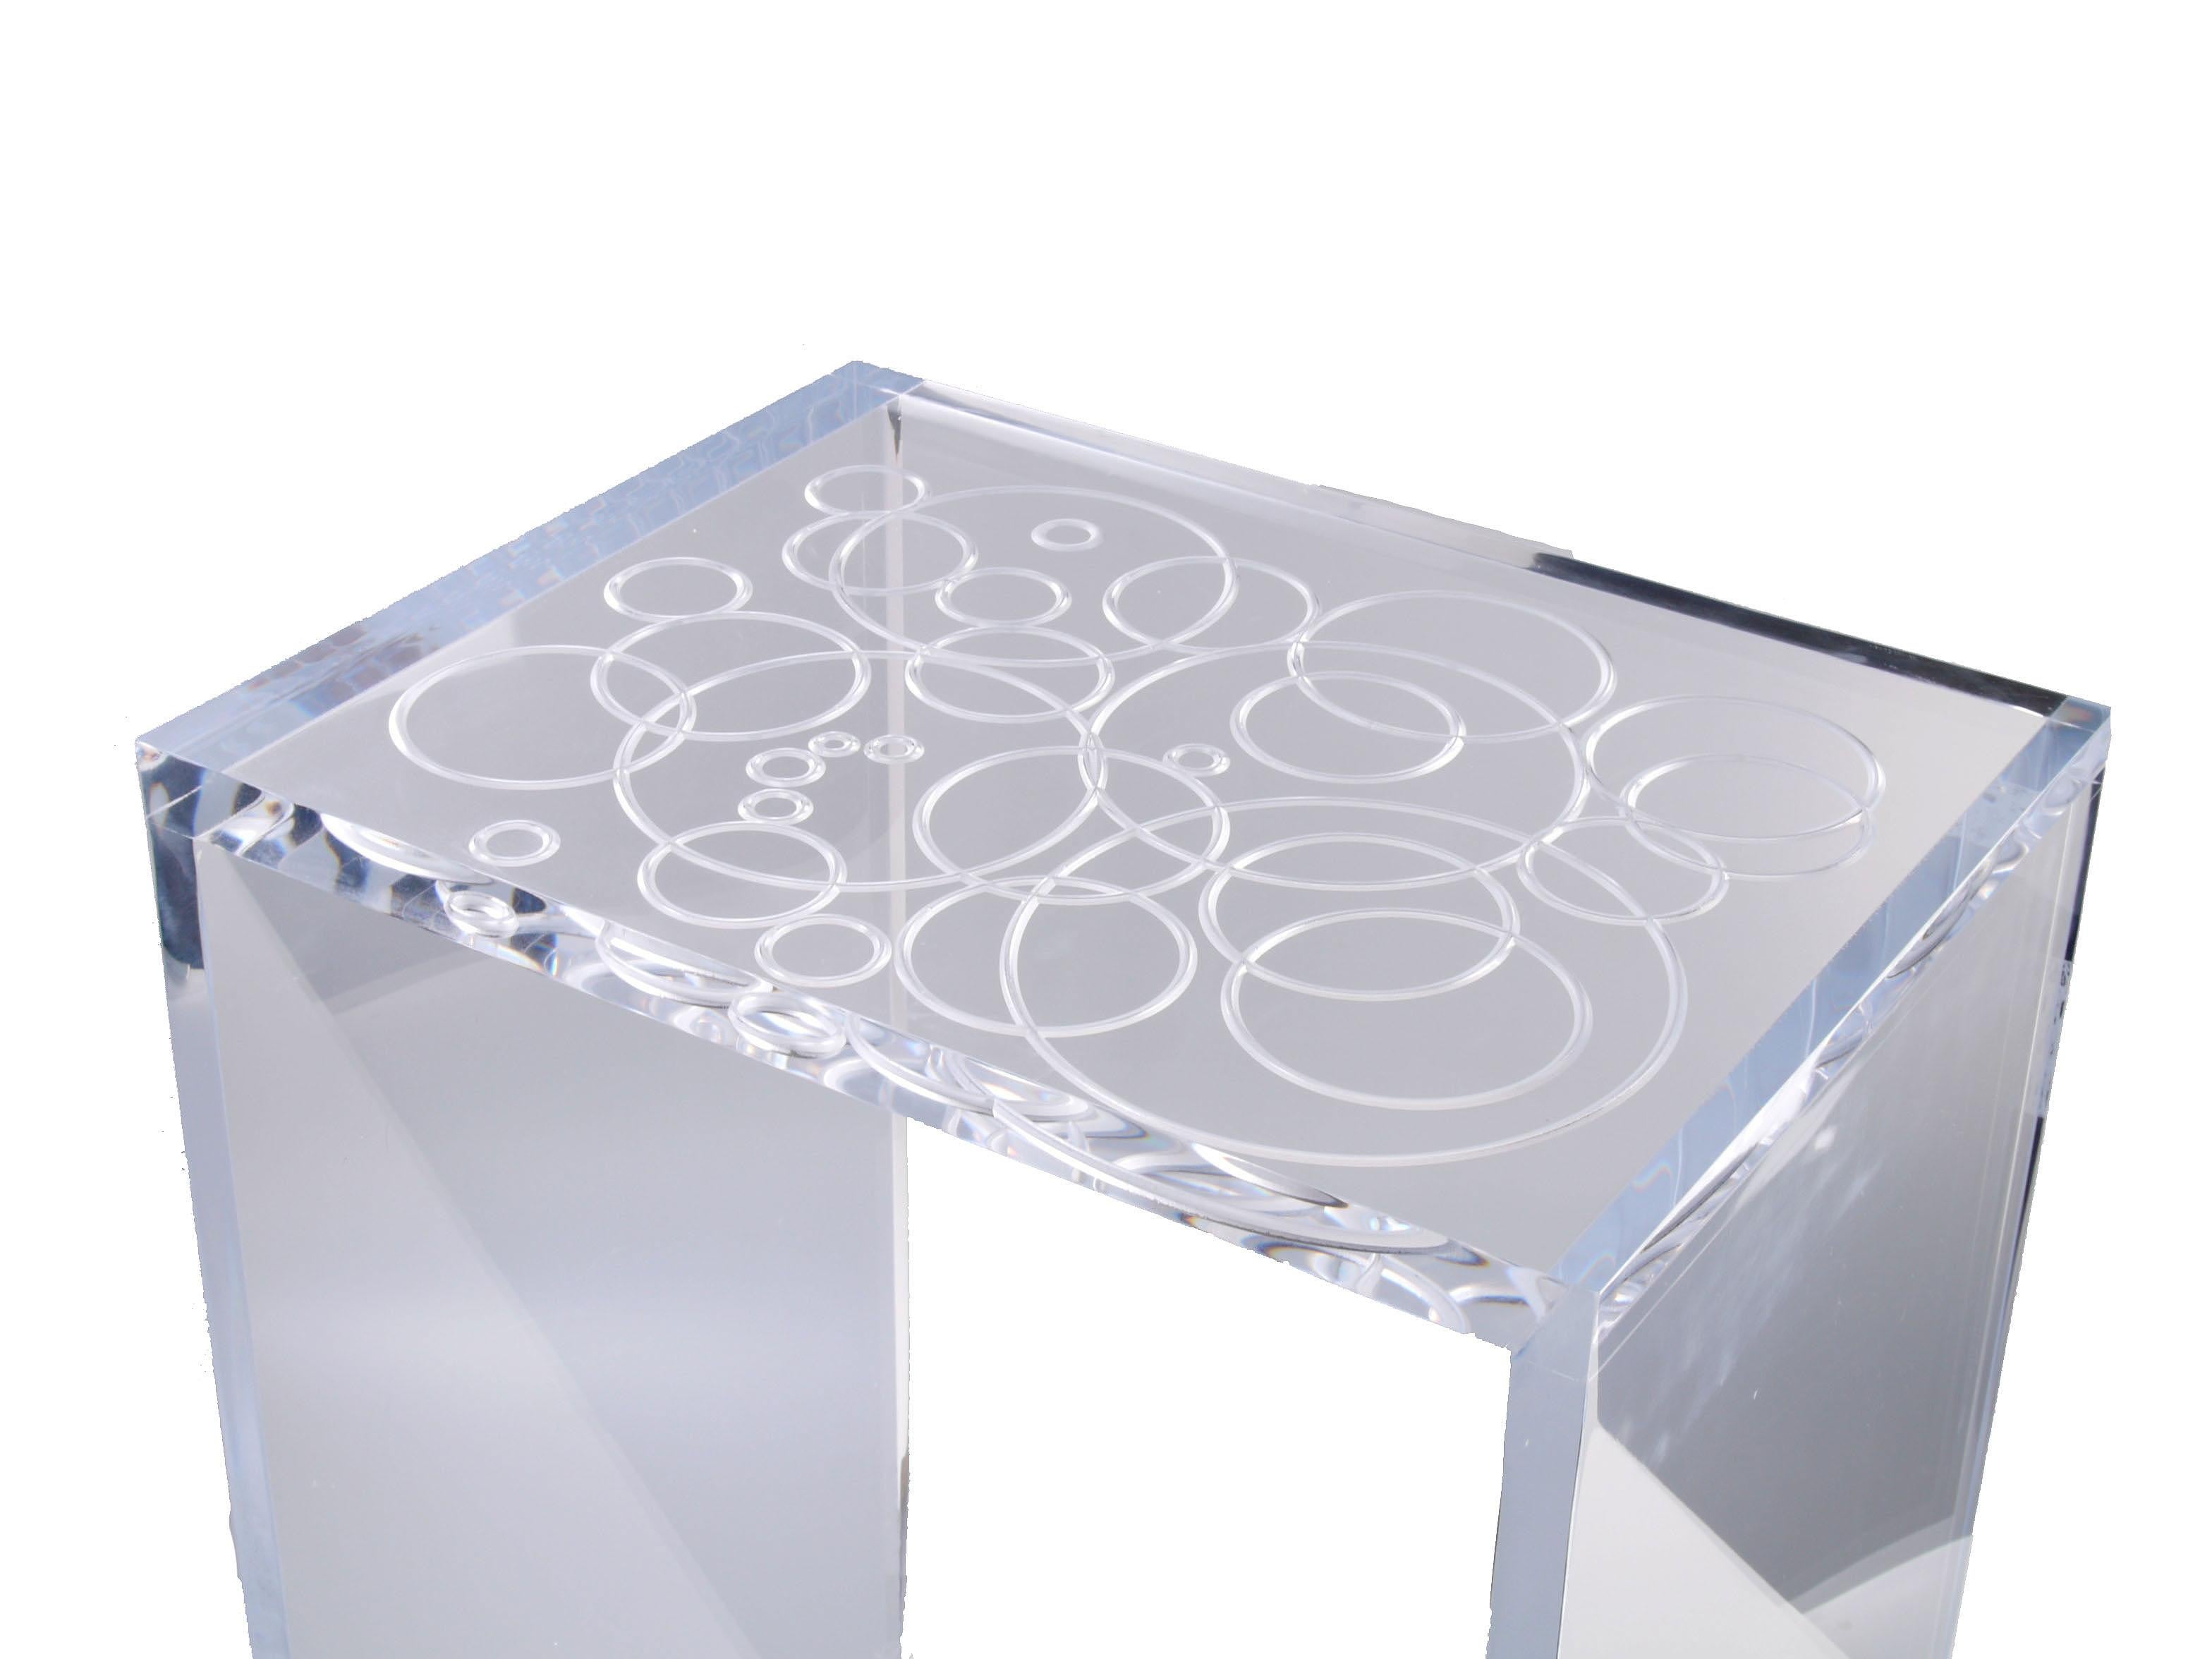 Modern clear Acrylic or Lucite side table, end table.
The top has etched details. 
Sturdy and heavy craftsmanship in clean design.